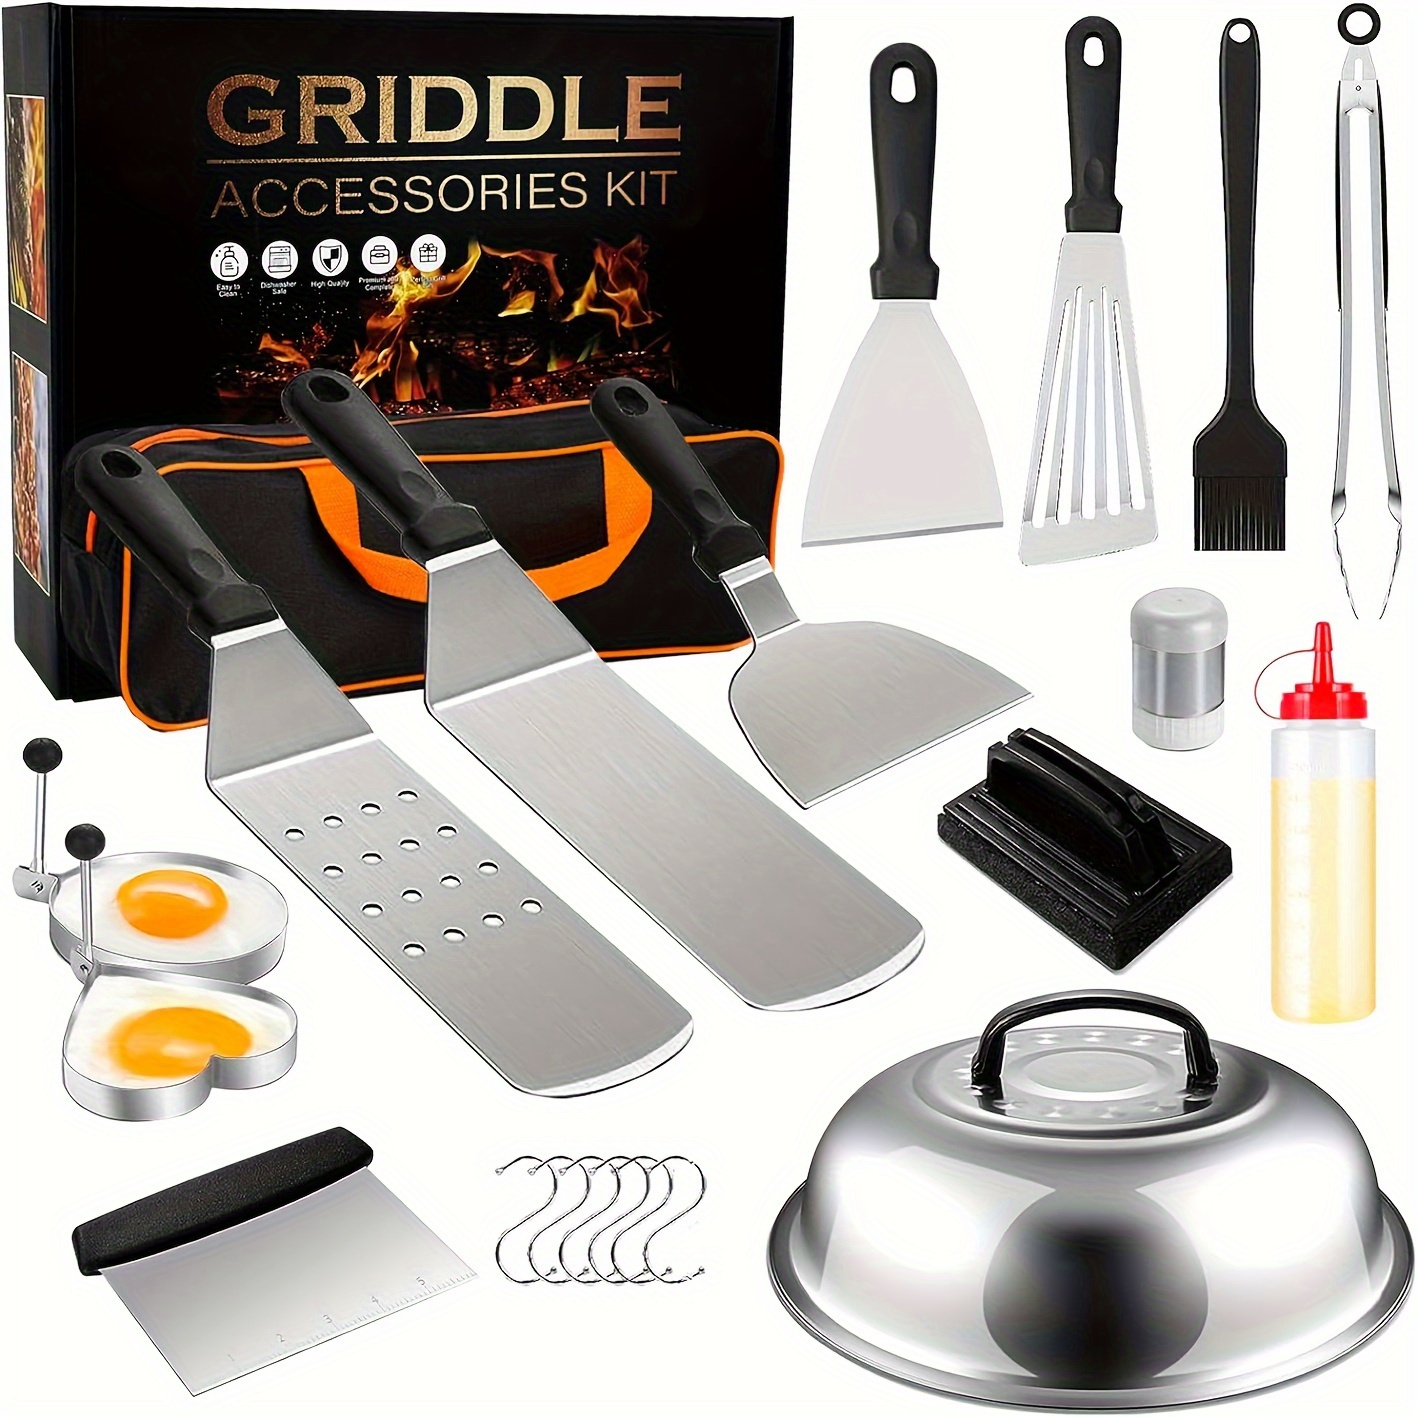 

22pcs Blackstone Griddle Accessories Kit, 22pcs Flat Accessories Set For Blackstone And Camp Chef, Scraper, Spatula, Basting Cover, Tongs, Egg Ring, Carry Bag For Outdoor Bbq